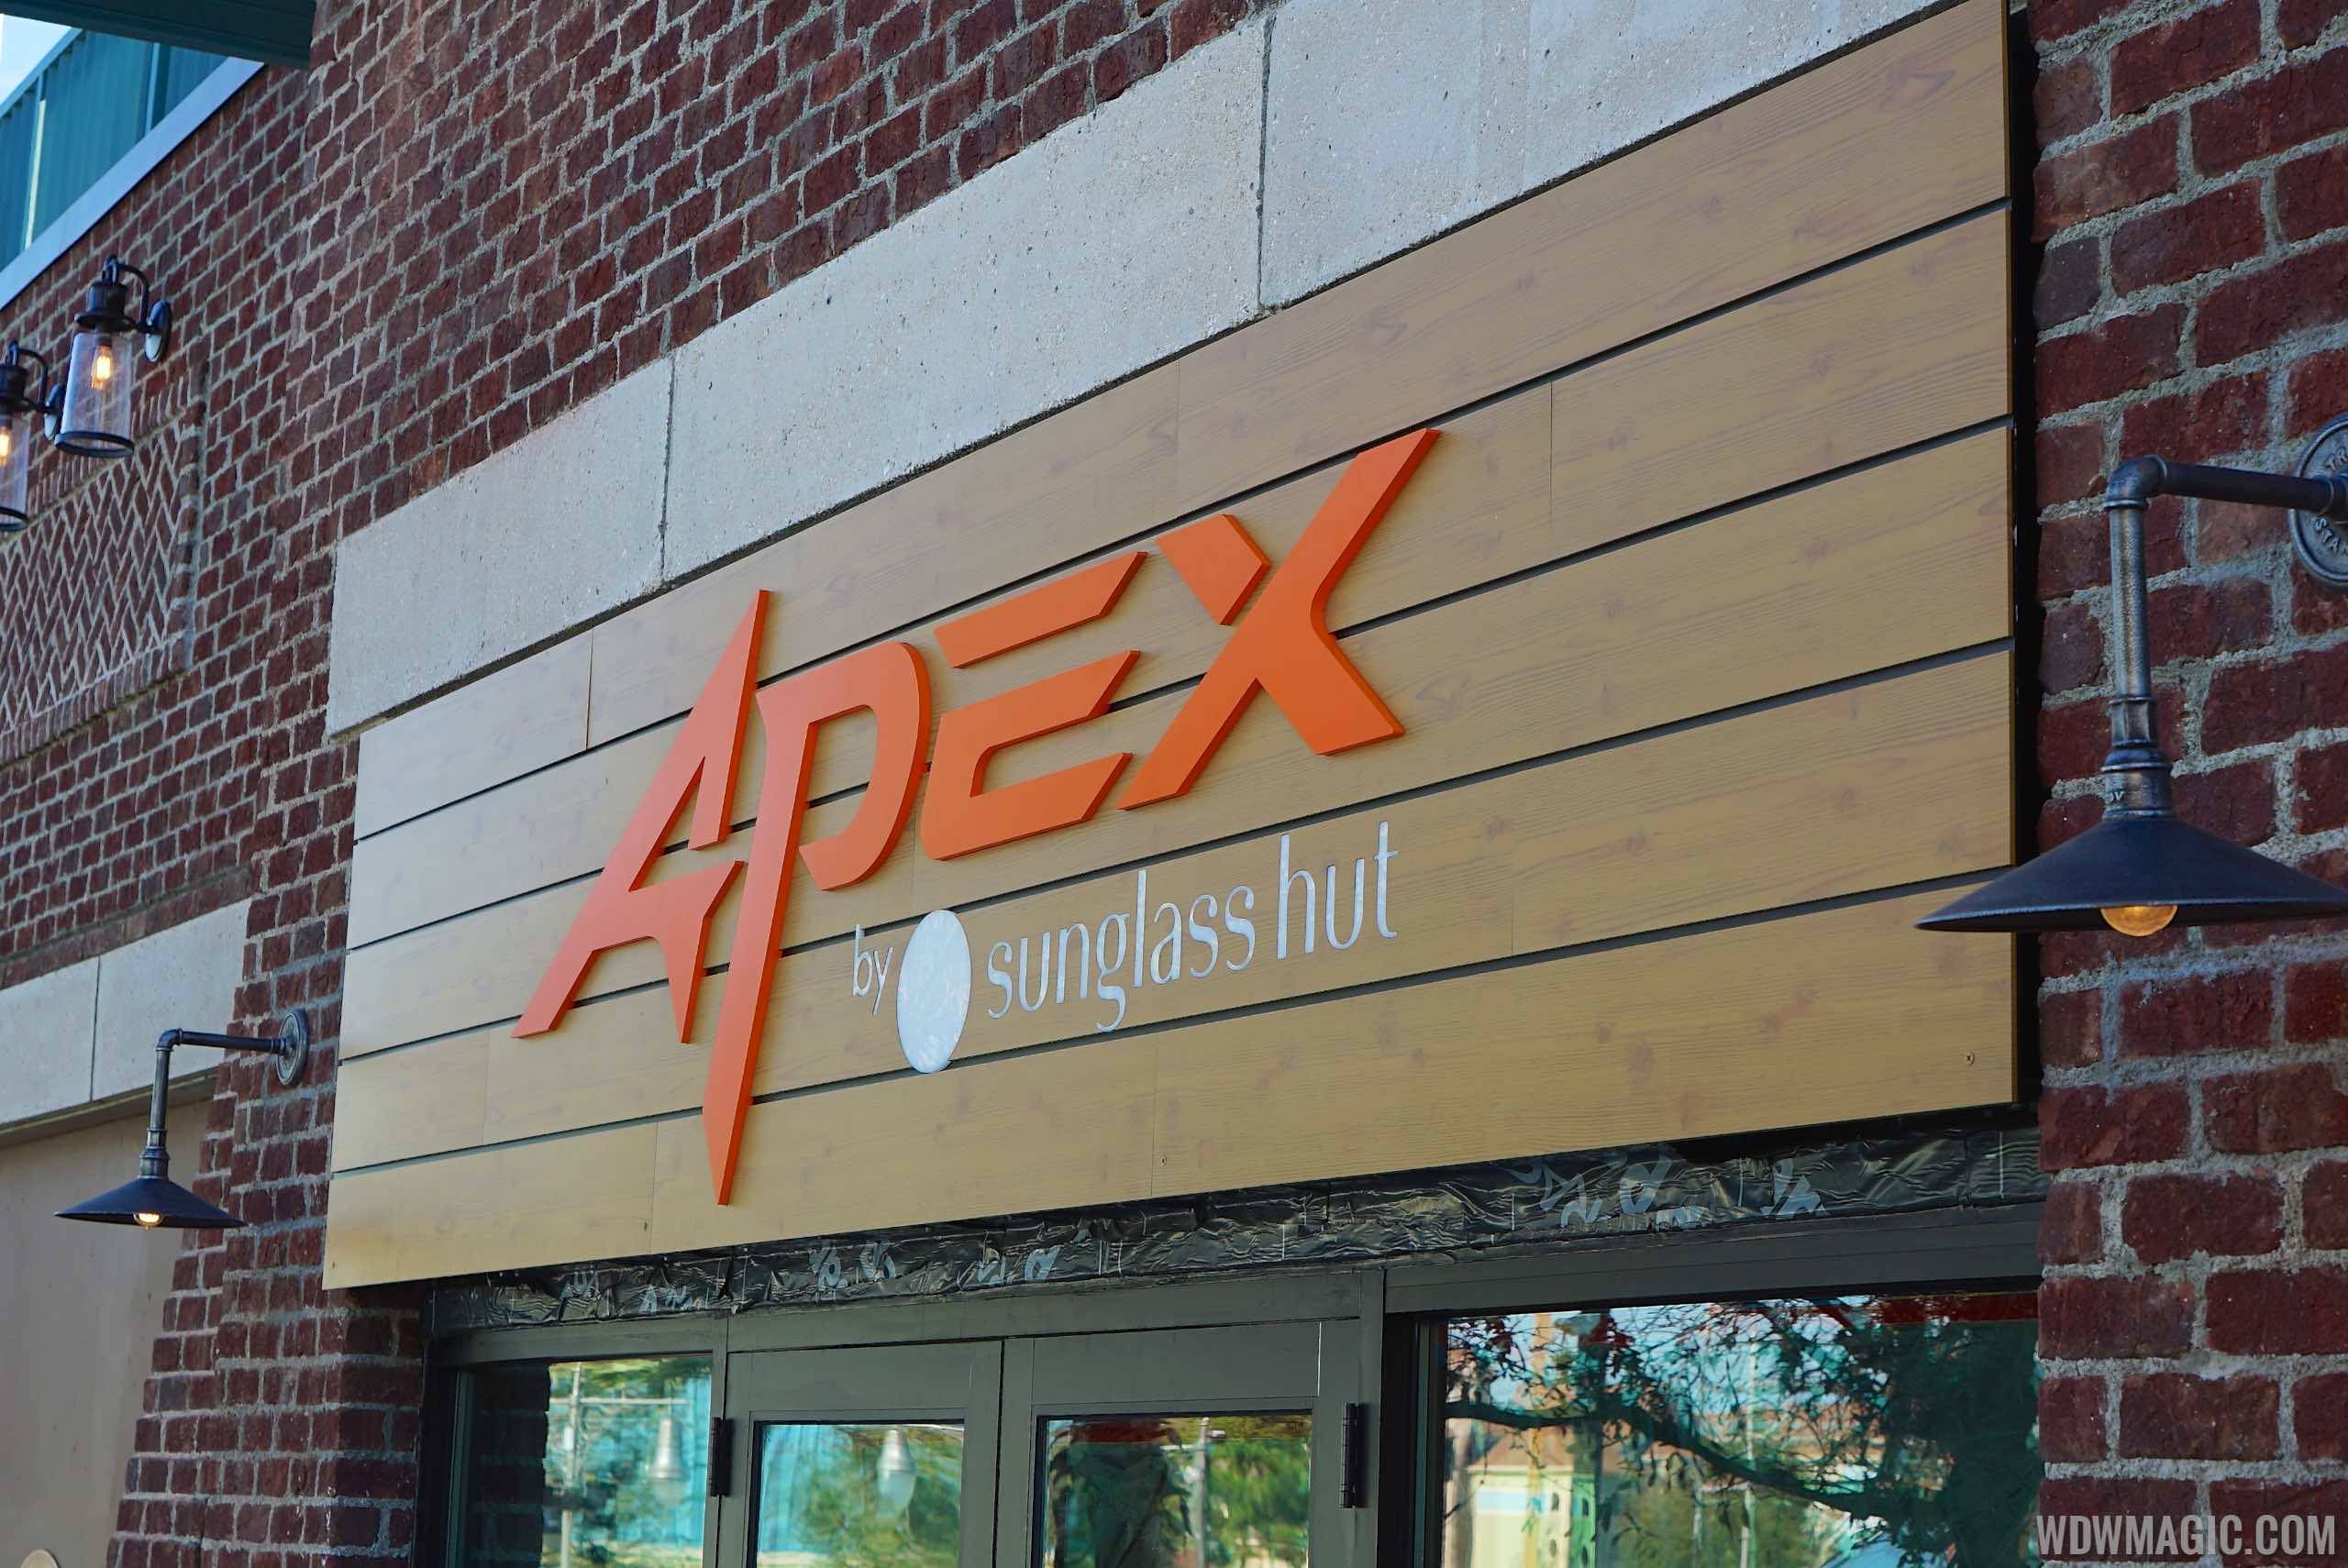 PHOTOS - APEX by Sunglass Hut signage goes up in The Landing at Disney Springs